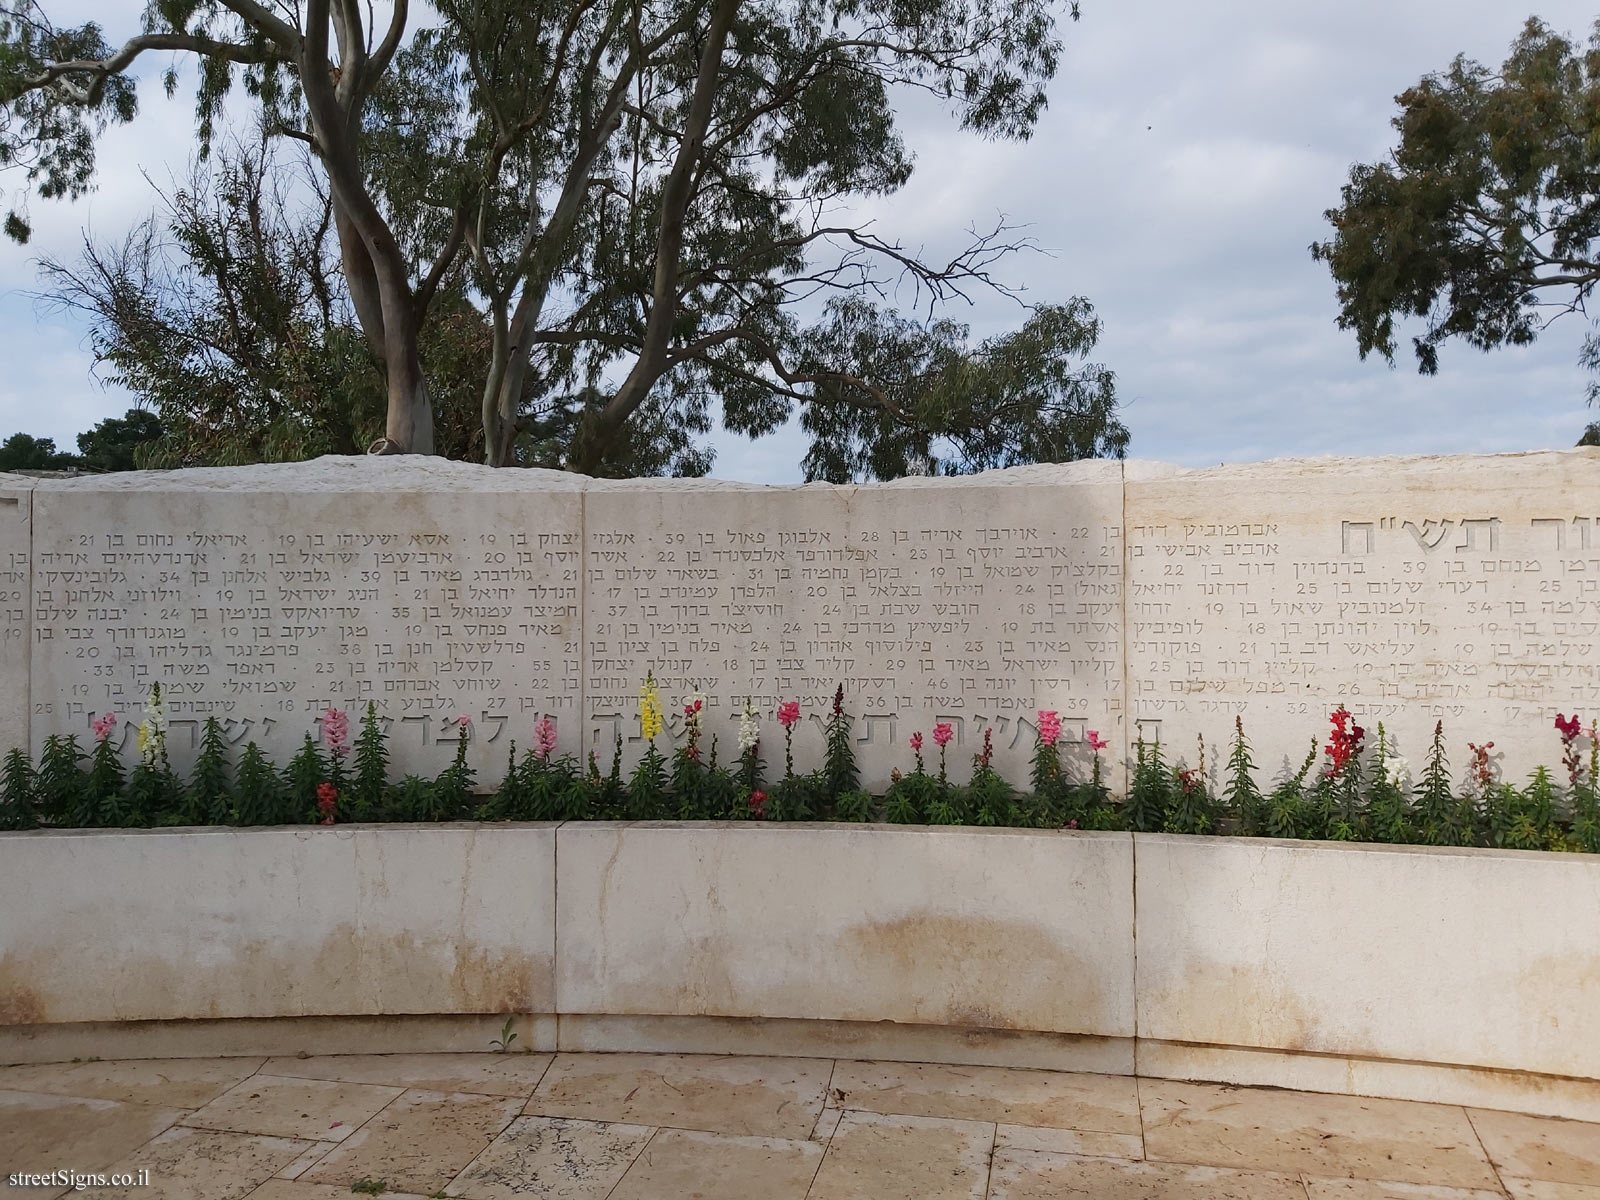 Ramat Gan - the monument to the victims of the 1948 war - Moshe Sharet St 28, Ramat Gan, Israel